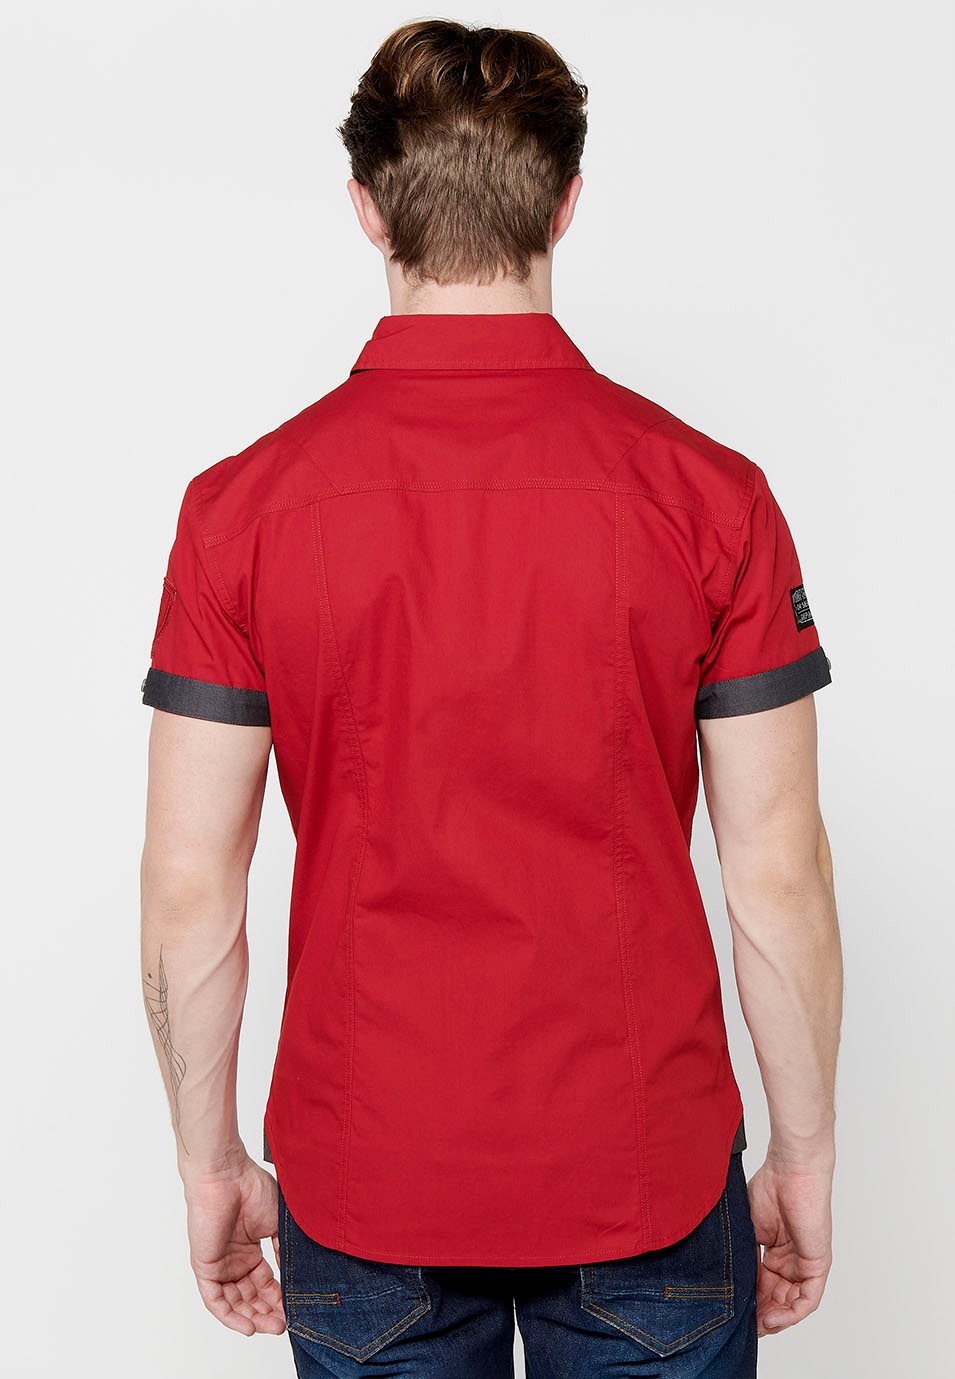 Short Sleeve Cotton Shirt with Button Front Closure and Front Flap Pockets in red Color for Men